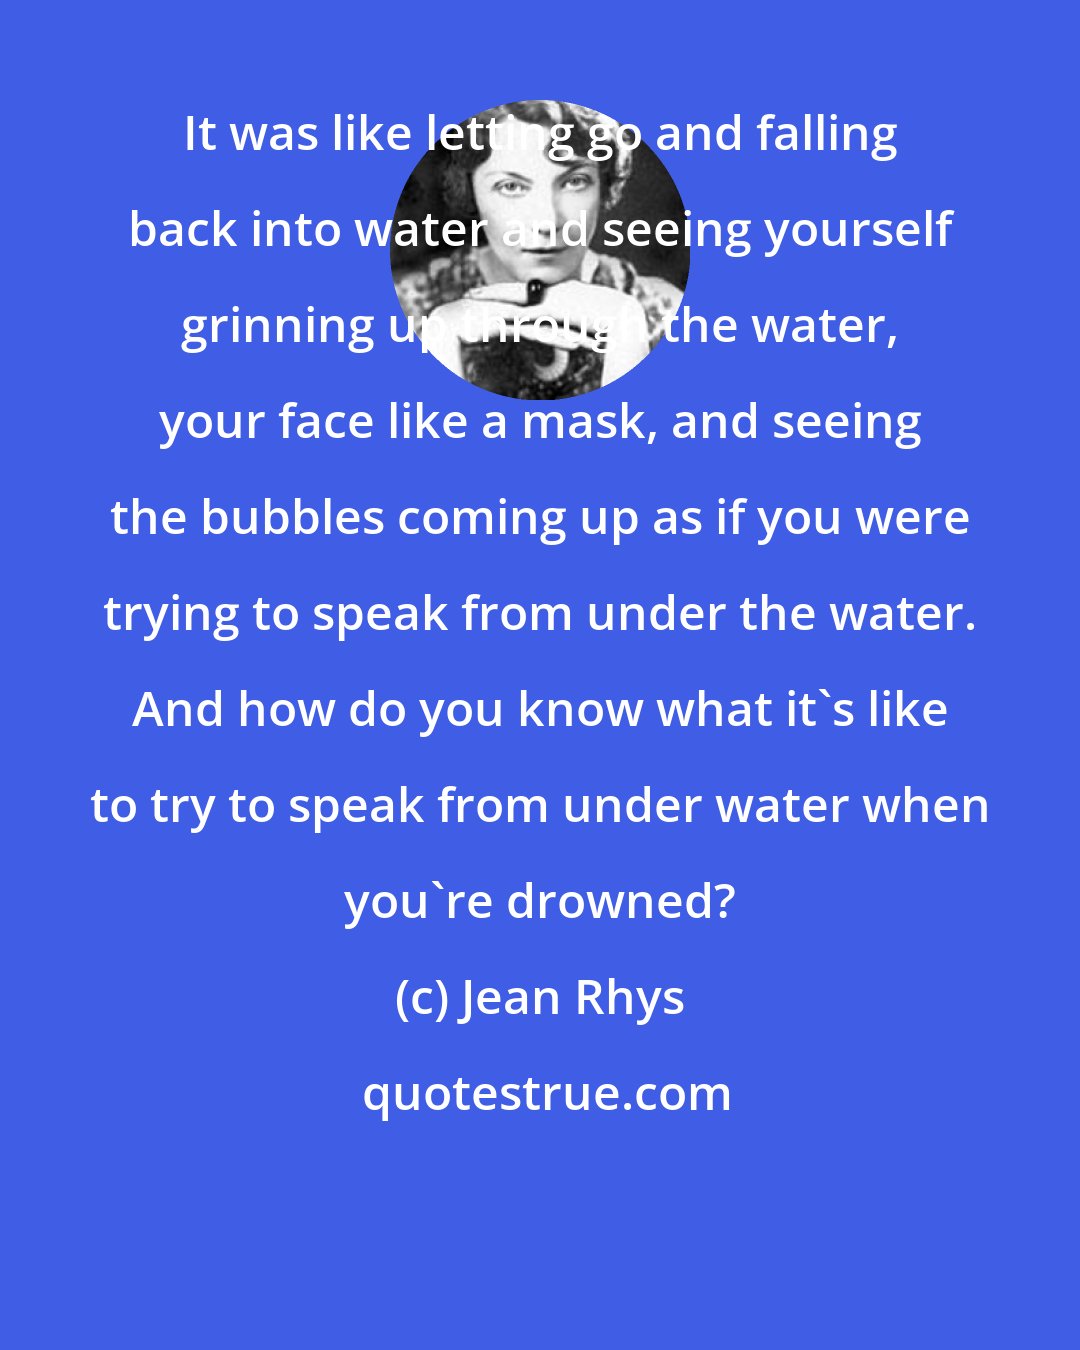 Jean Rhys: It was like letting go and falling back into water and seeing yourself grinning up through the water, your face like a mask, and seeing the bubbles coming up as if you were trying to speak from under the water. And how do you know what it's like to try to speak from under water when you're drowned?